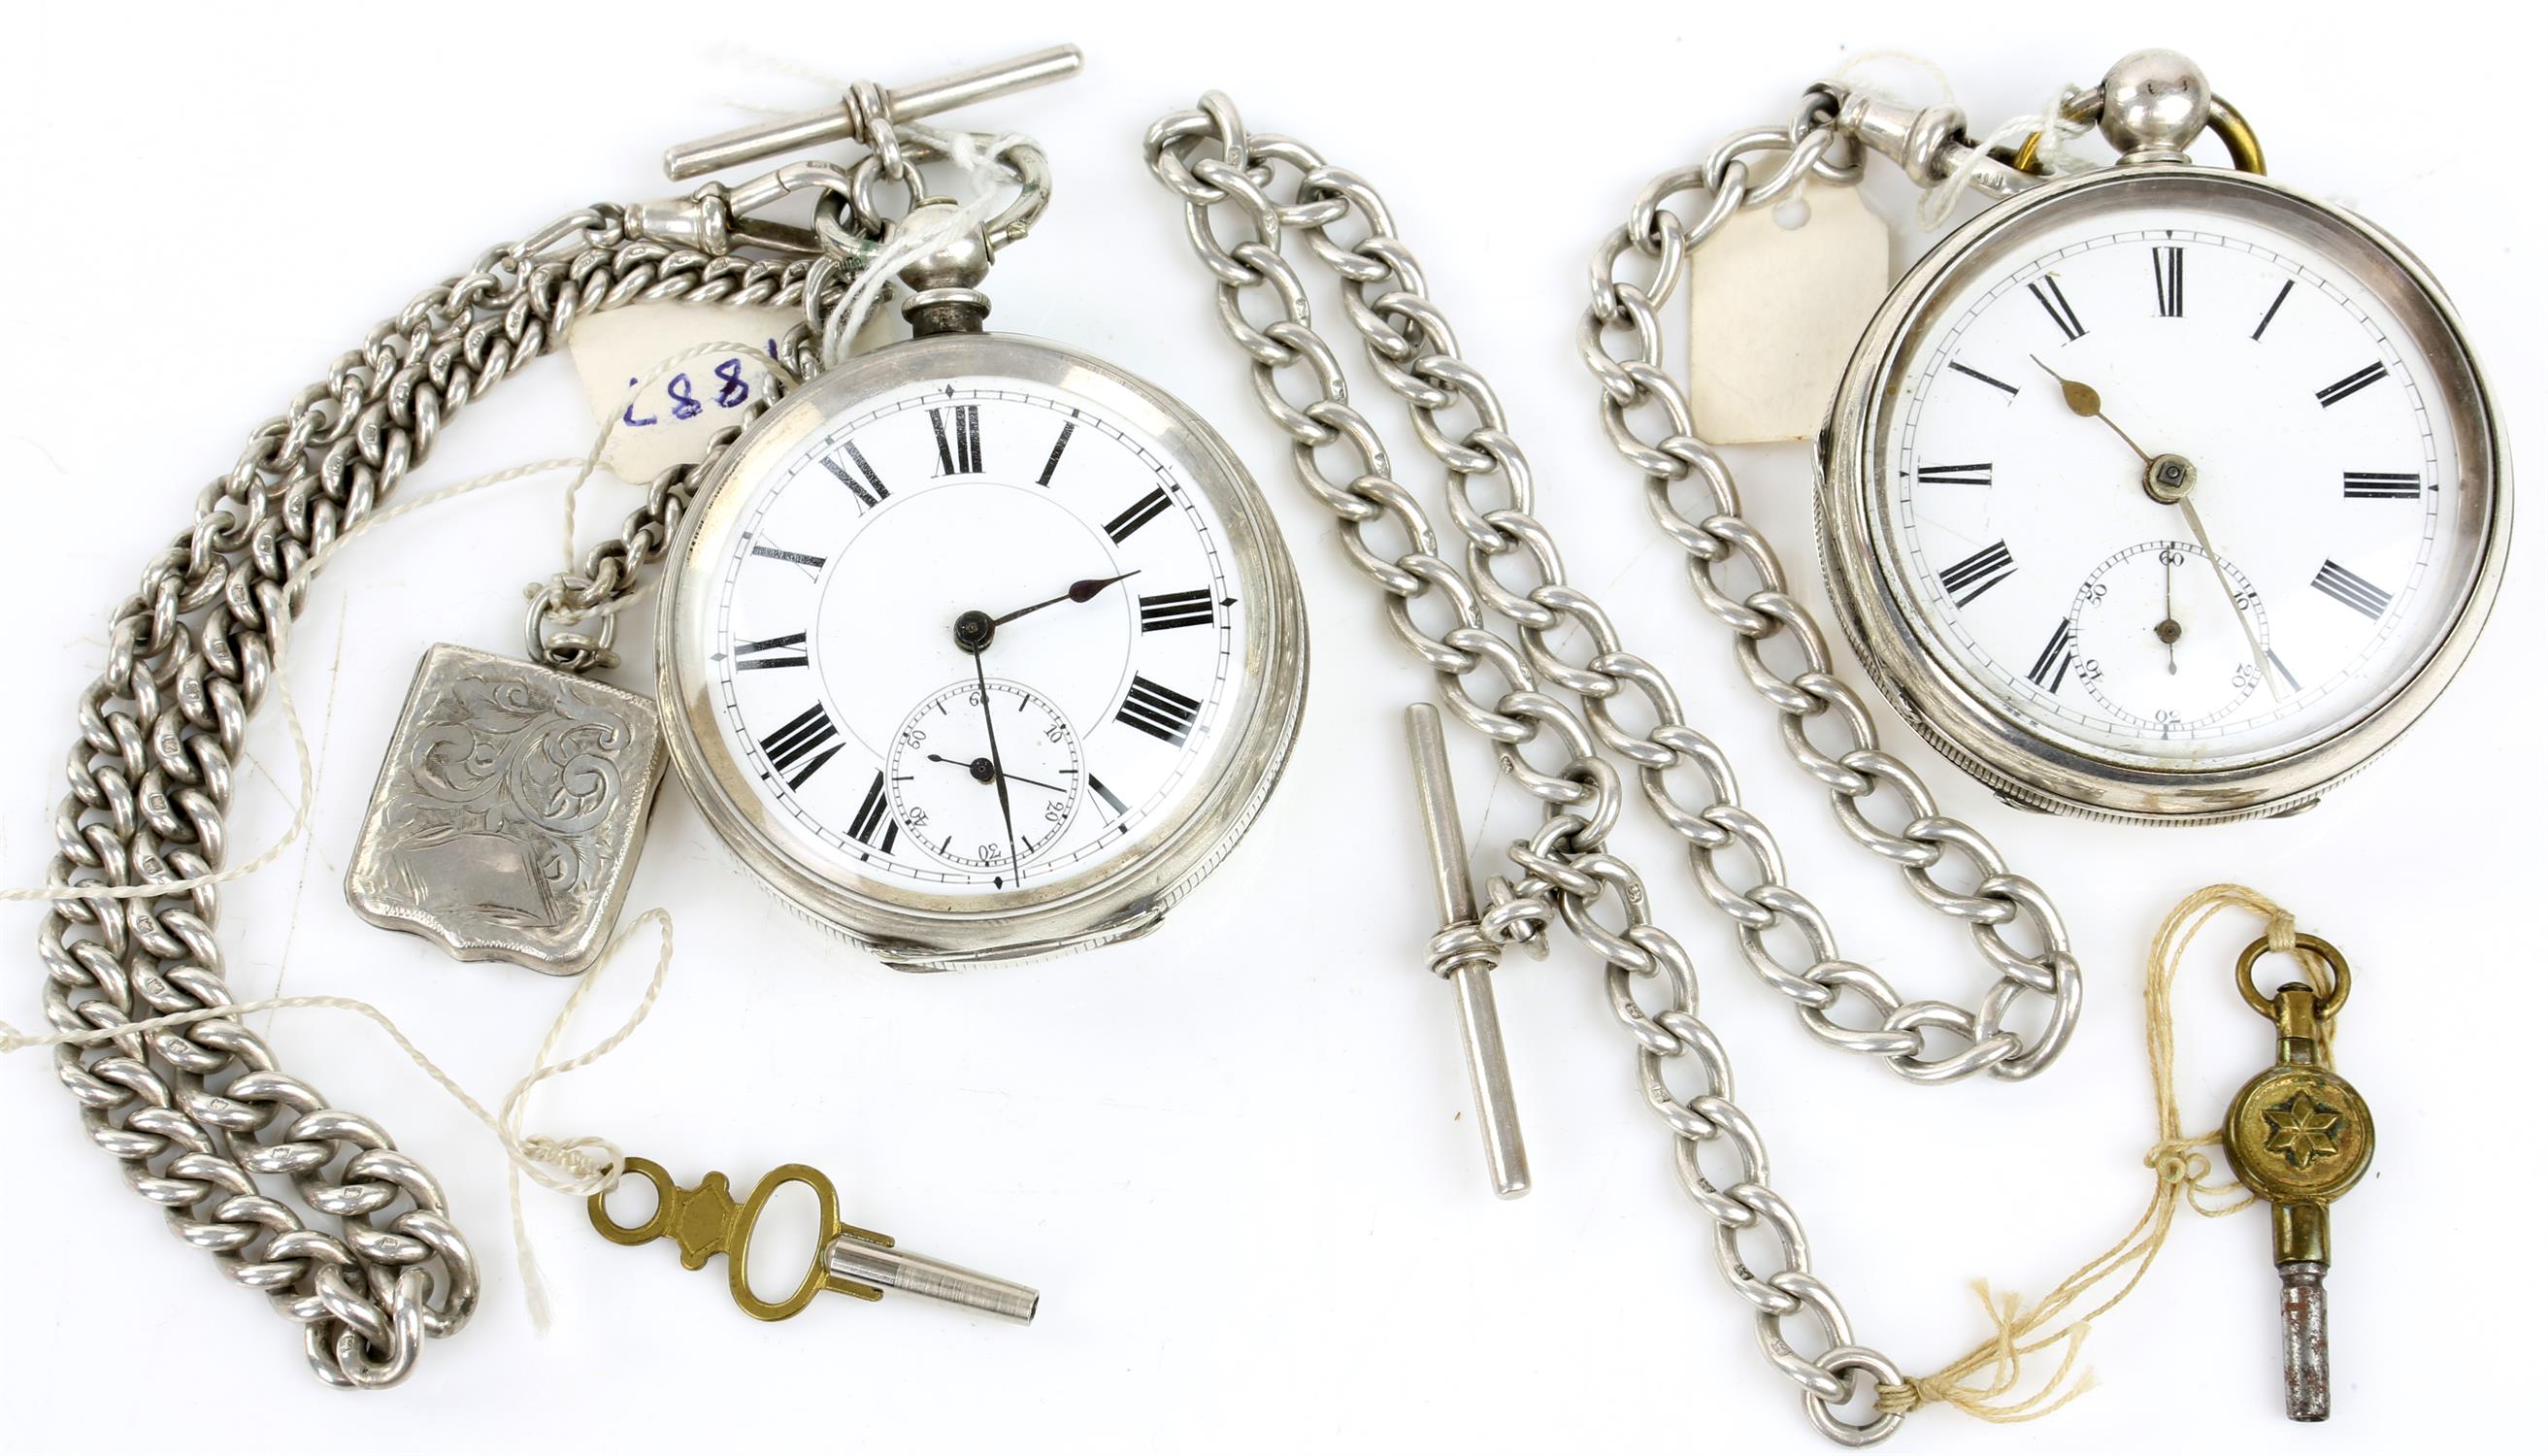 Two silver open face pocket watches, both with unsigned white enamel dial, Roman numeral hour